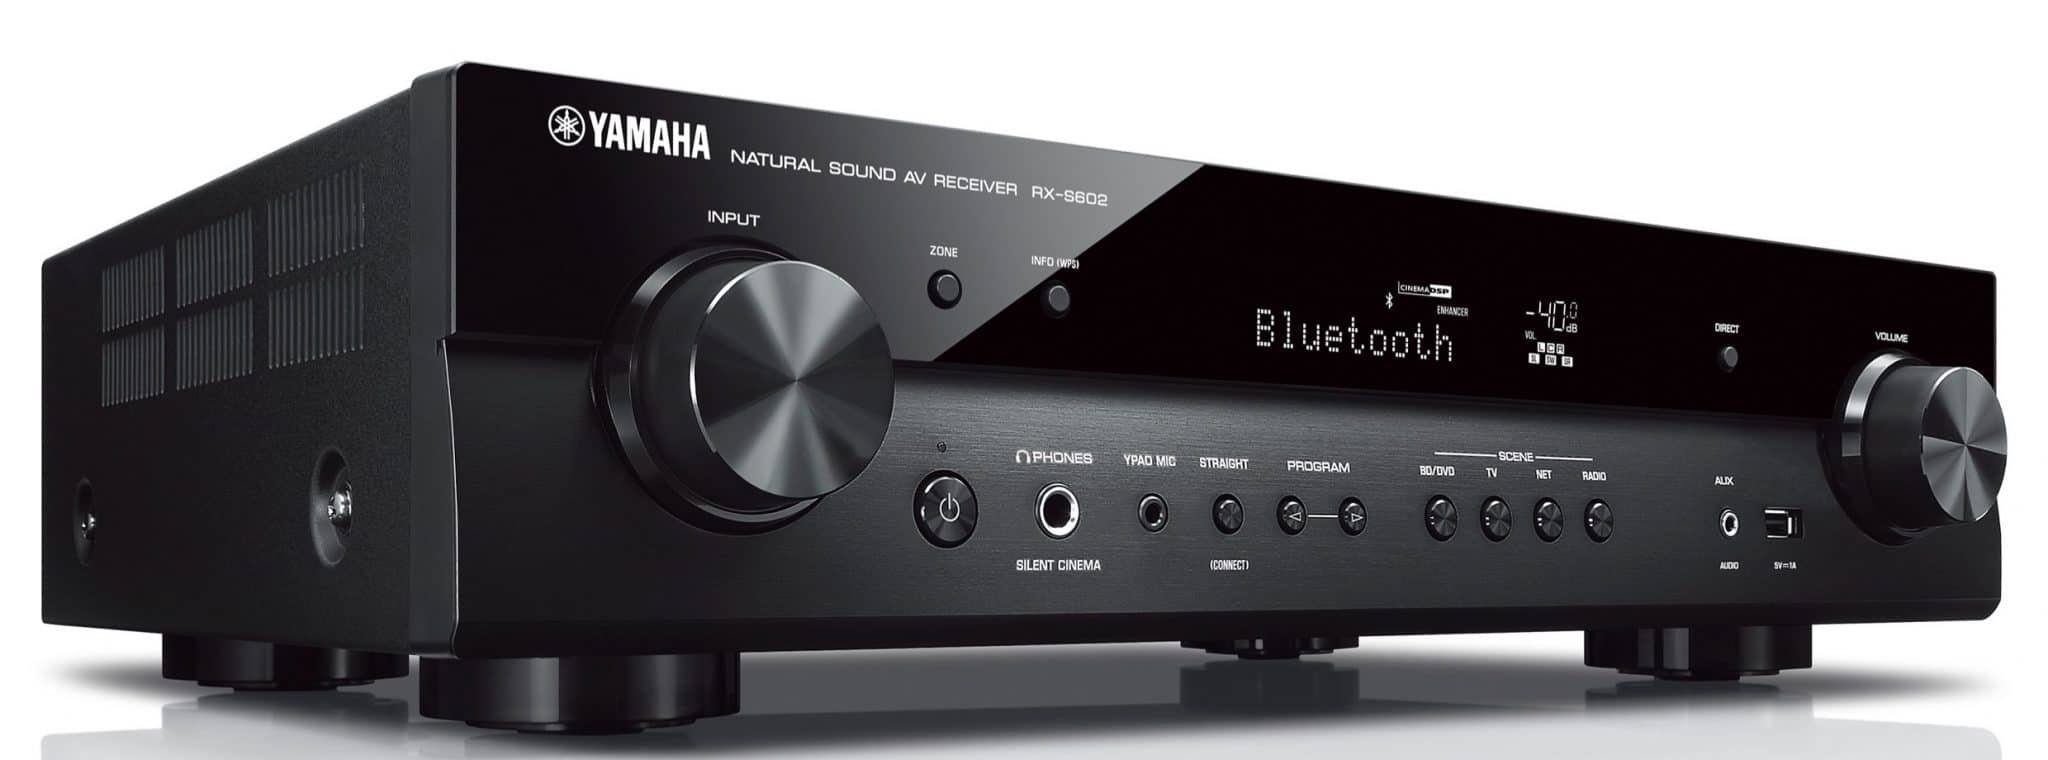 Yamaha Firmware Updates: Streaming and Voice Control